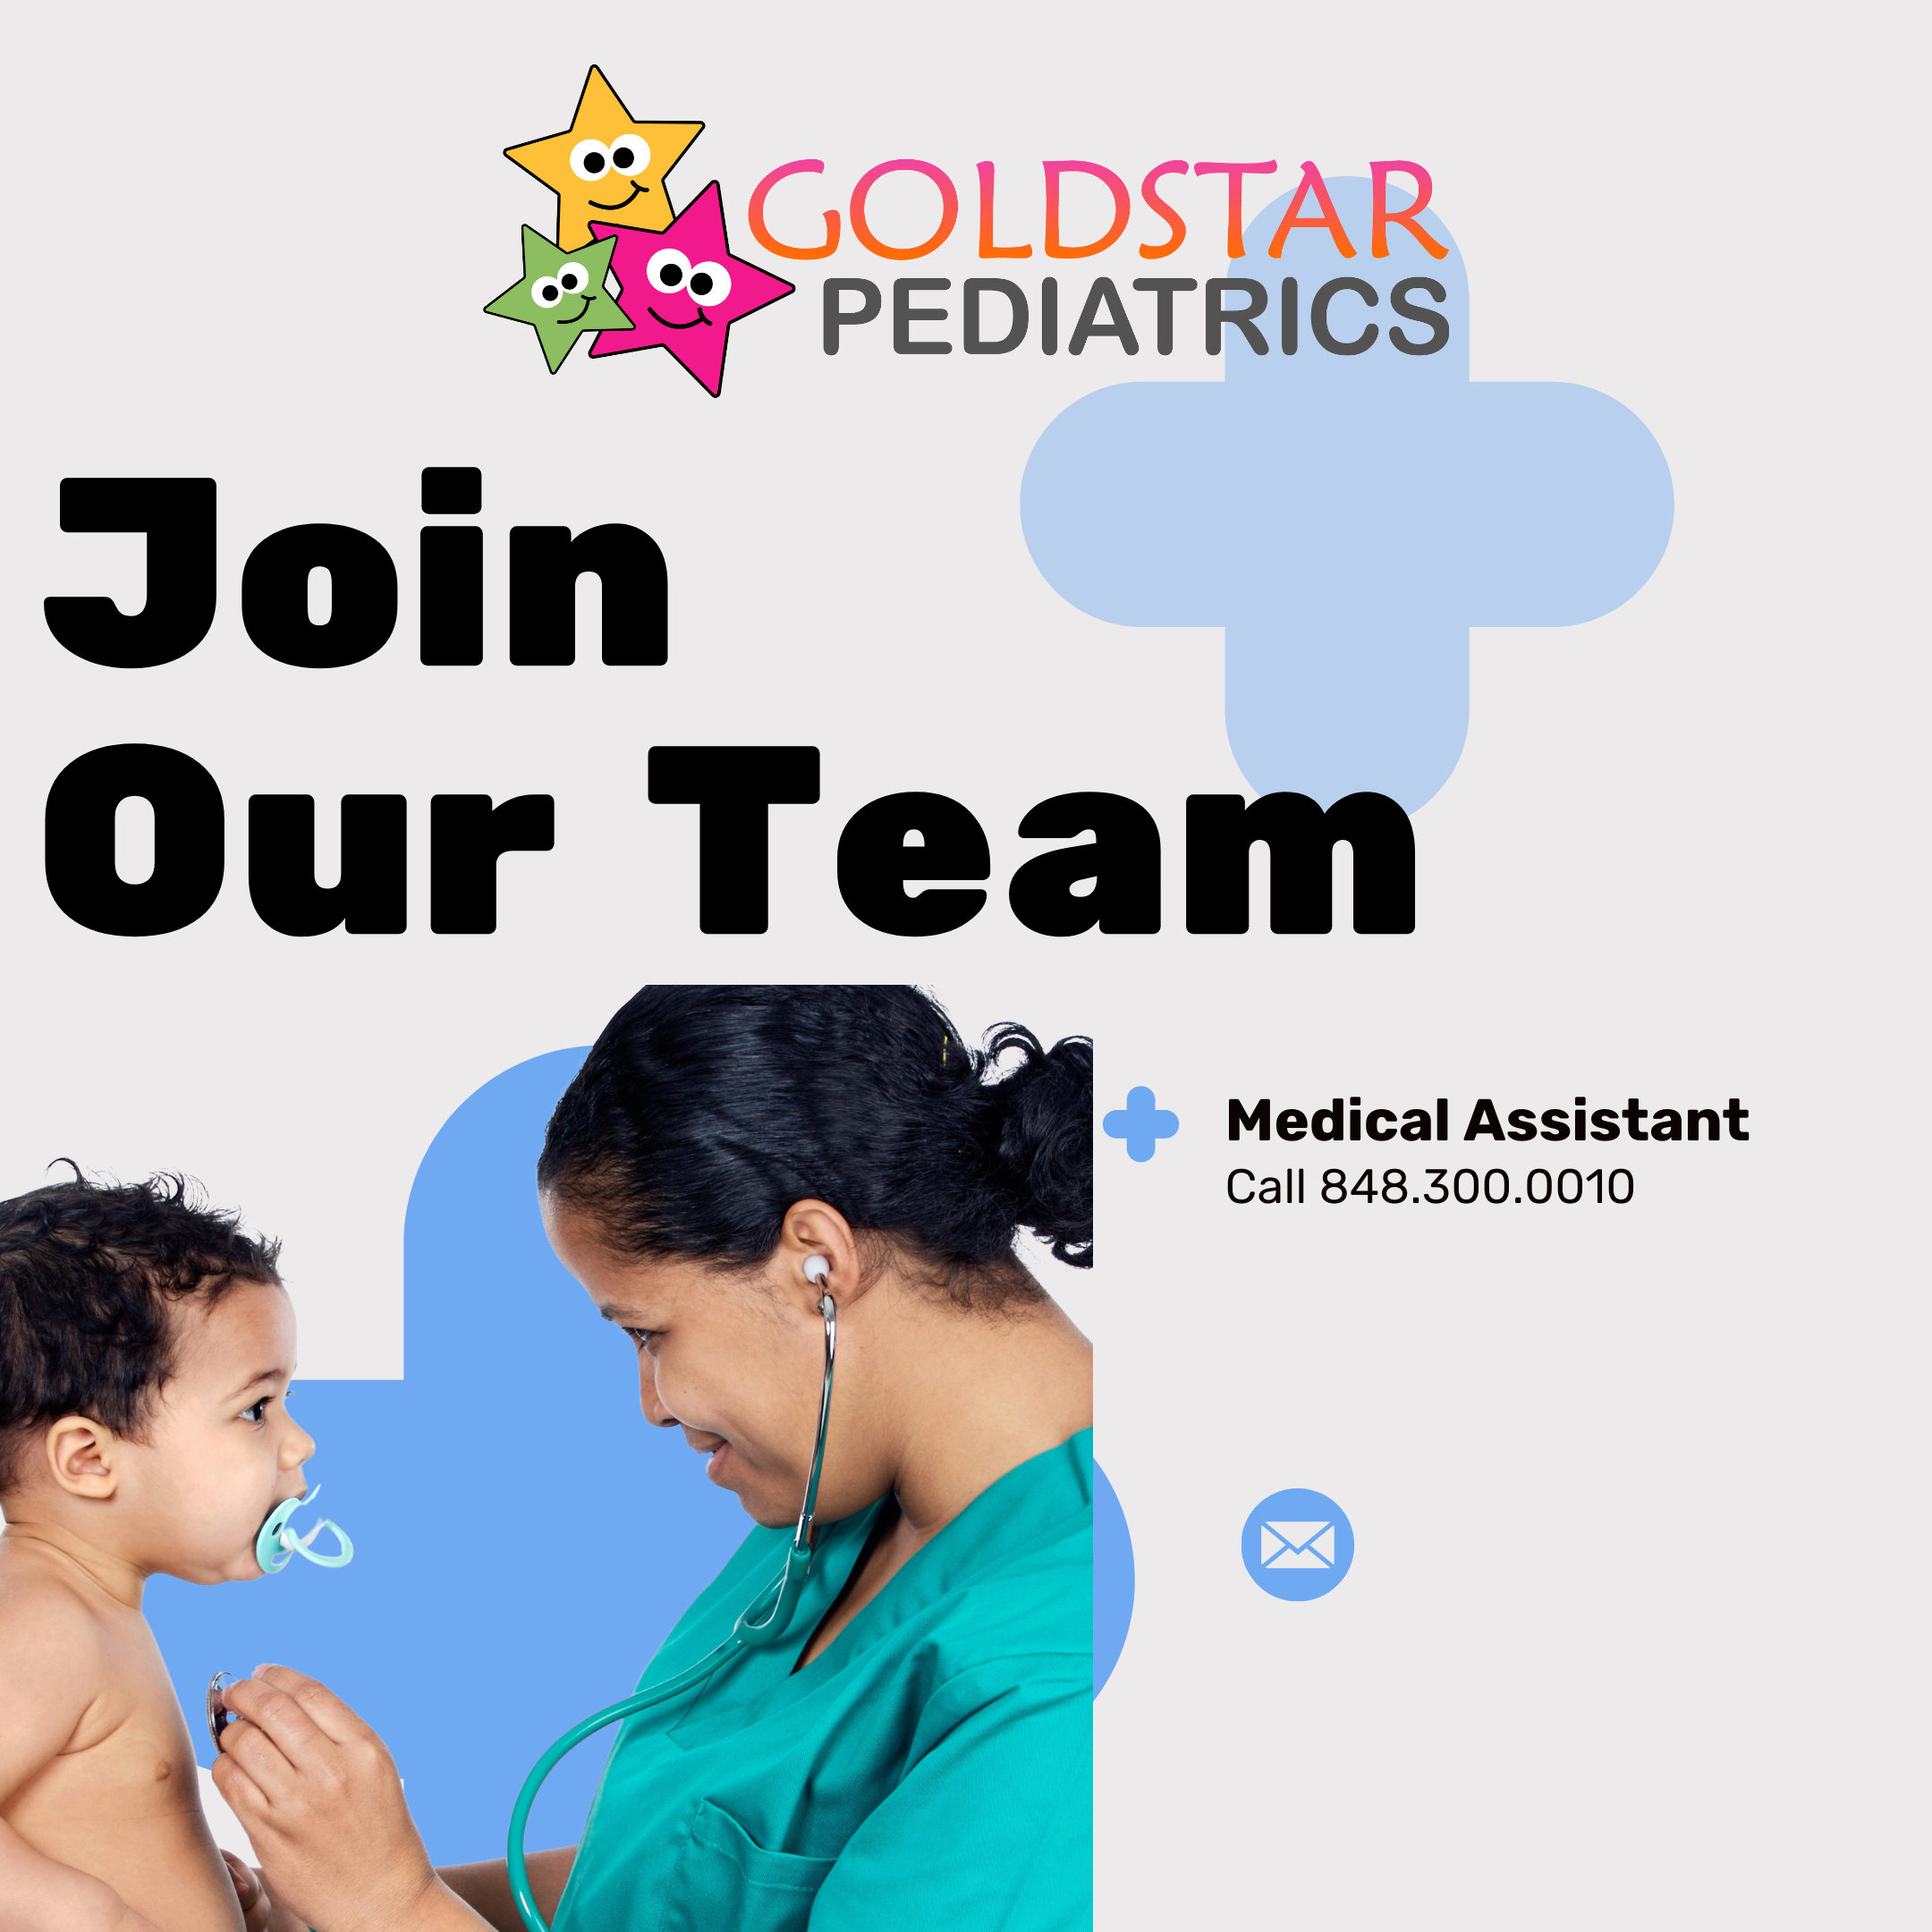 Medical professional examining a baby with text: "Goldstar Pediatrics. Join Our Team. Medical Assistant. Call 848.300.0010.